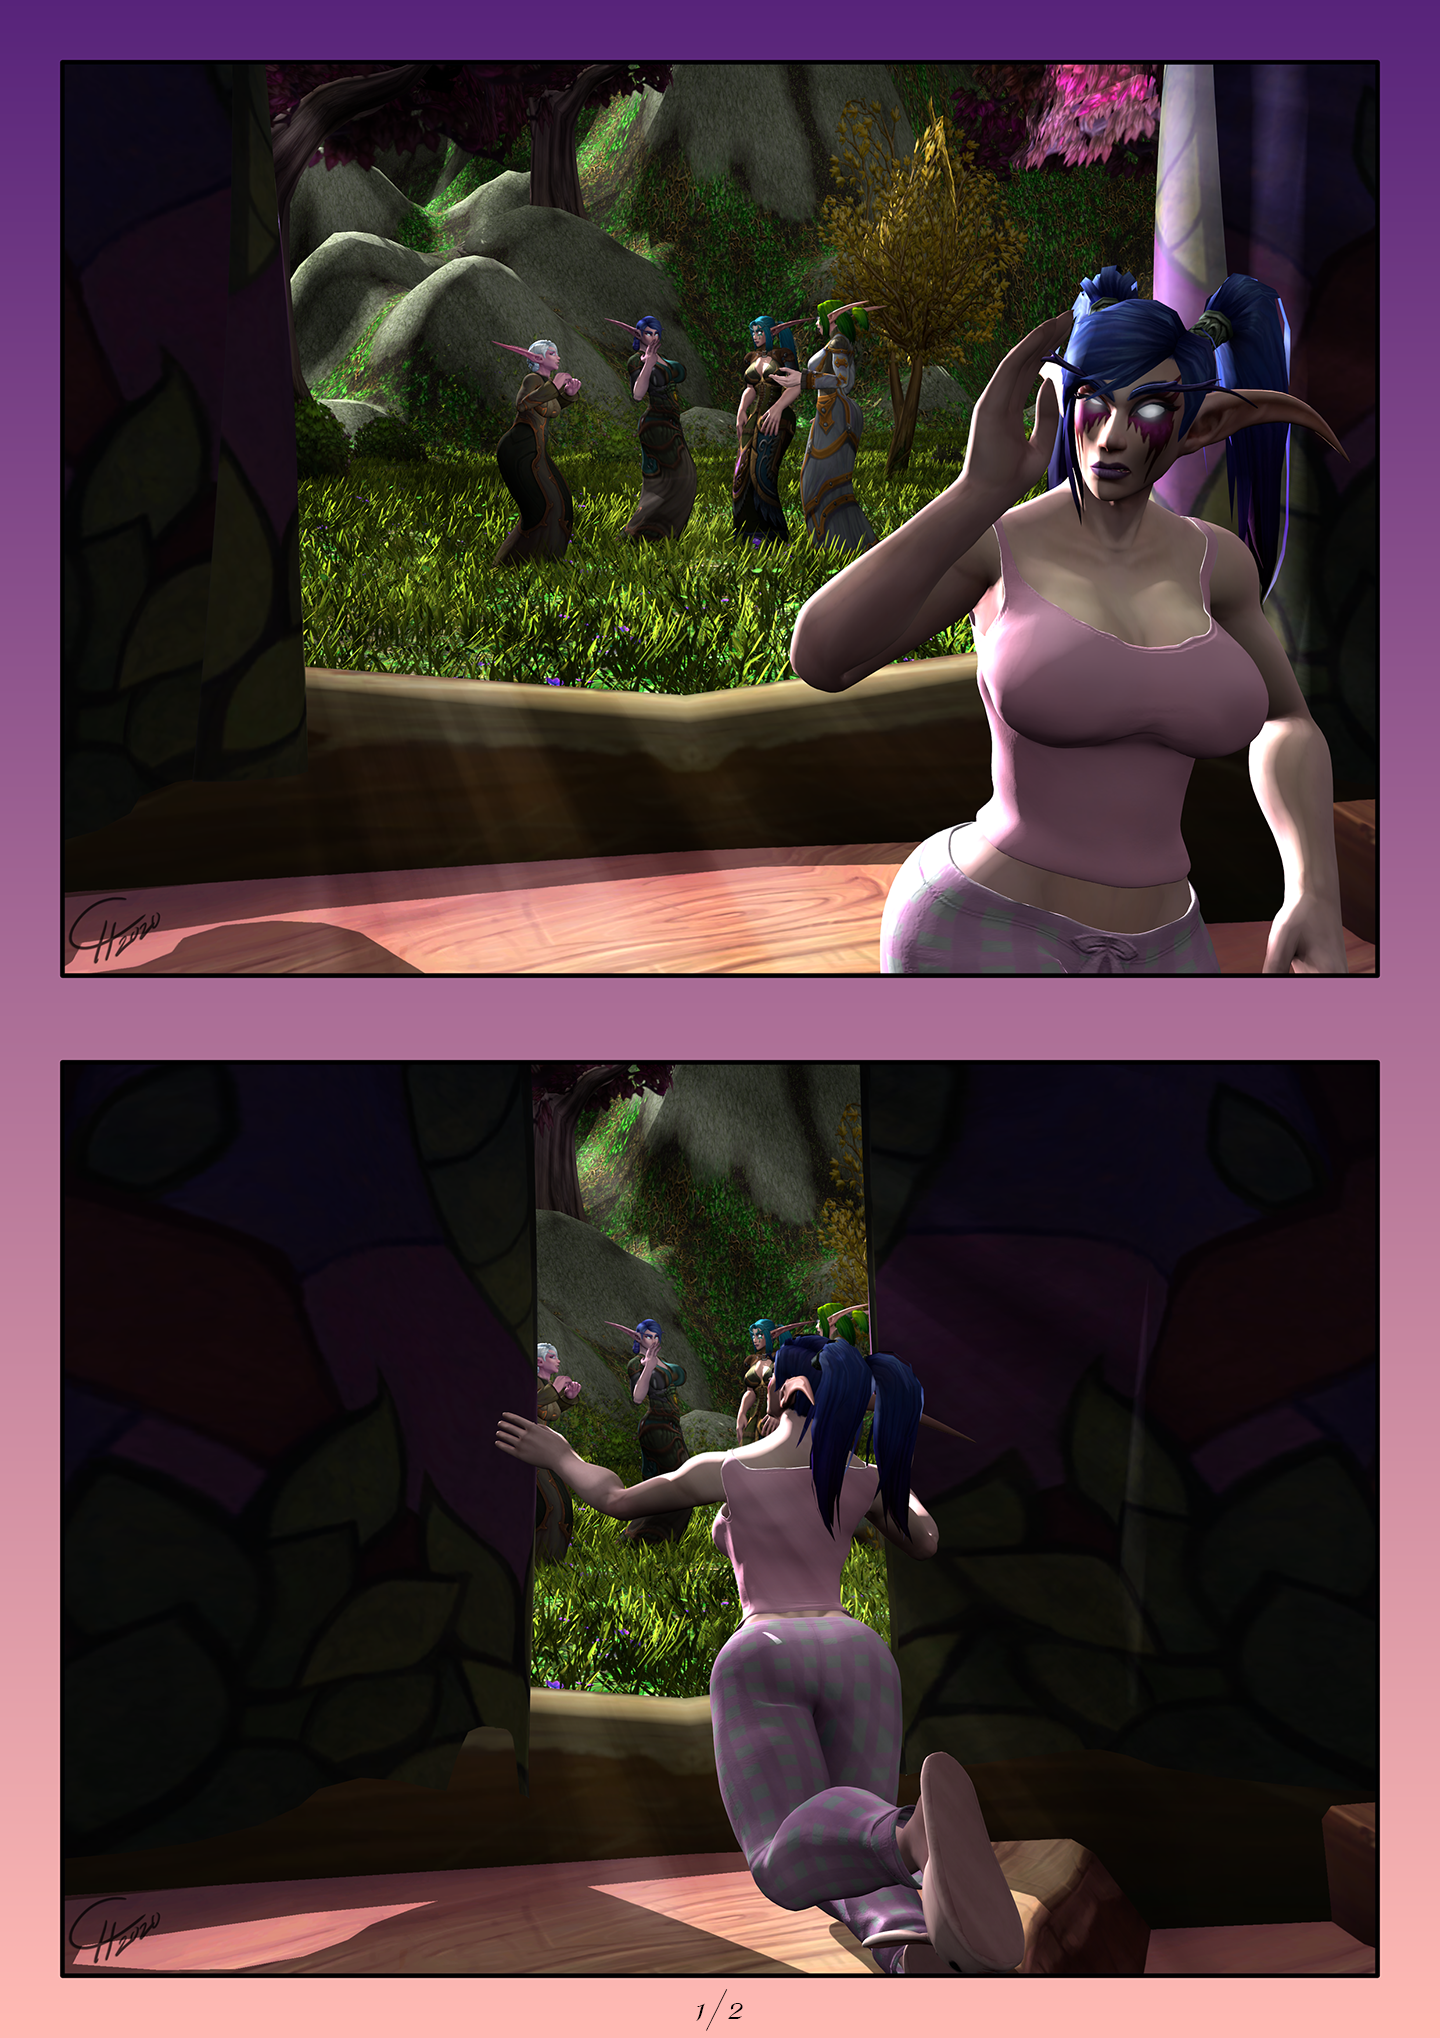 Closing the Curtains P1/2 [Nelf/Comic/SFW]
2020 Free Commission #7 page 1/2
Recent years the Kaldorei have slowly moved more
into being diurnal race, than being nocturnal.
Some are still more home in the dark,
especially during the more brighter seasons.
[b][url=http://bakaras.com/murlocish/albums/userpics/10001/12/2020SpringComm07Page01XL.png]==XL-Size Edit==[/url][/b]
Keywords: nelf;OC;commission;comic;SFW